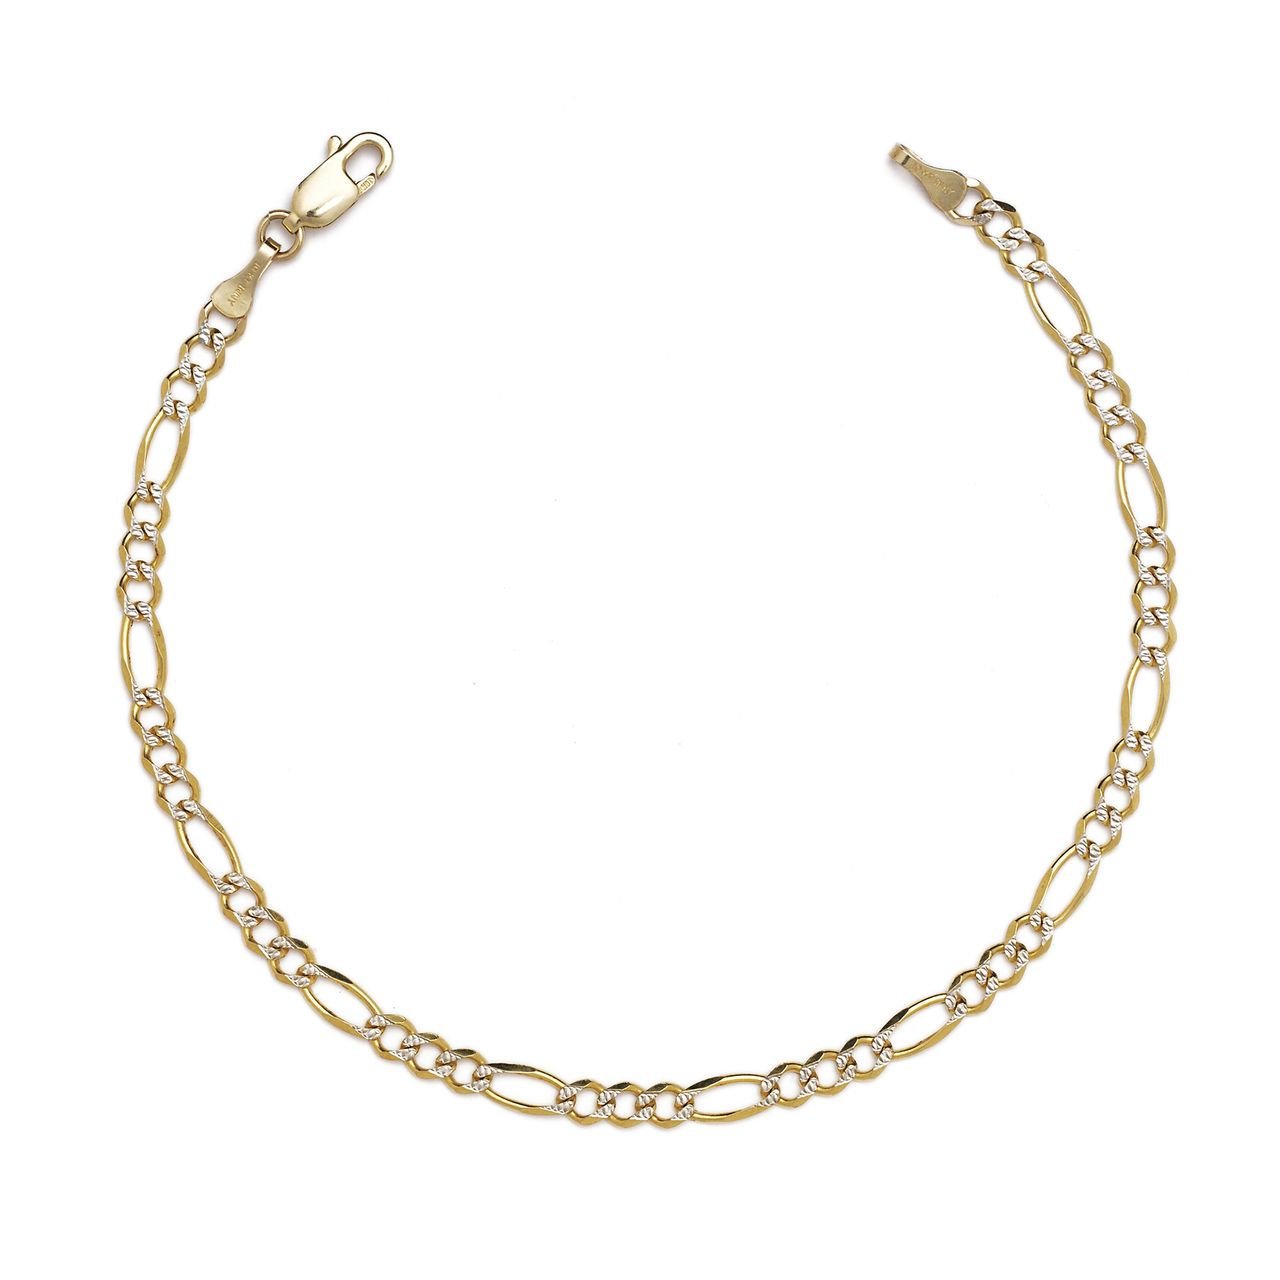 10k Two-Tone Gold Figaro Chian Bracelet and Anklet, White Pave, 0.16 Inch (4mm)